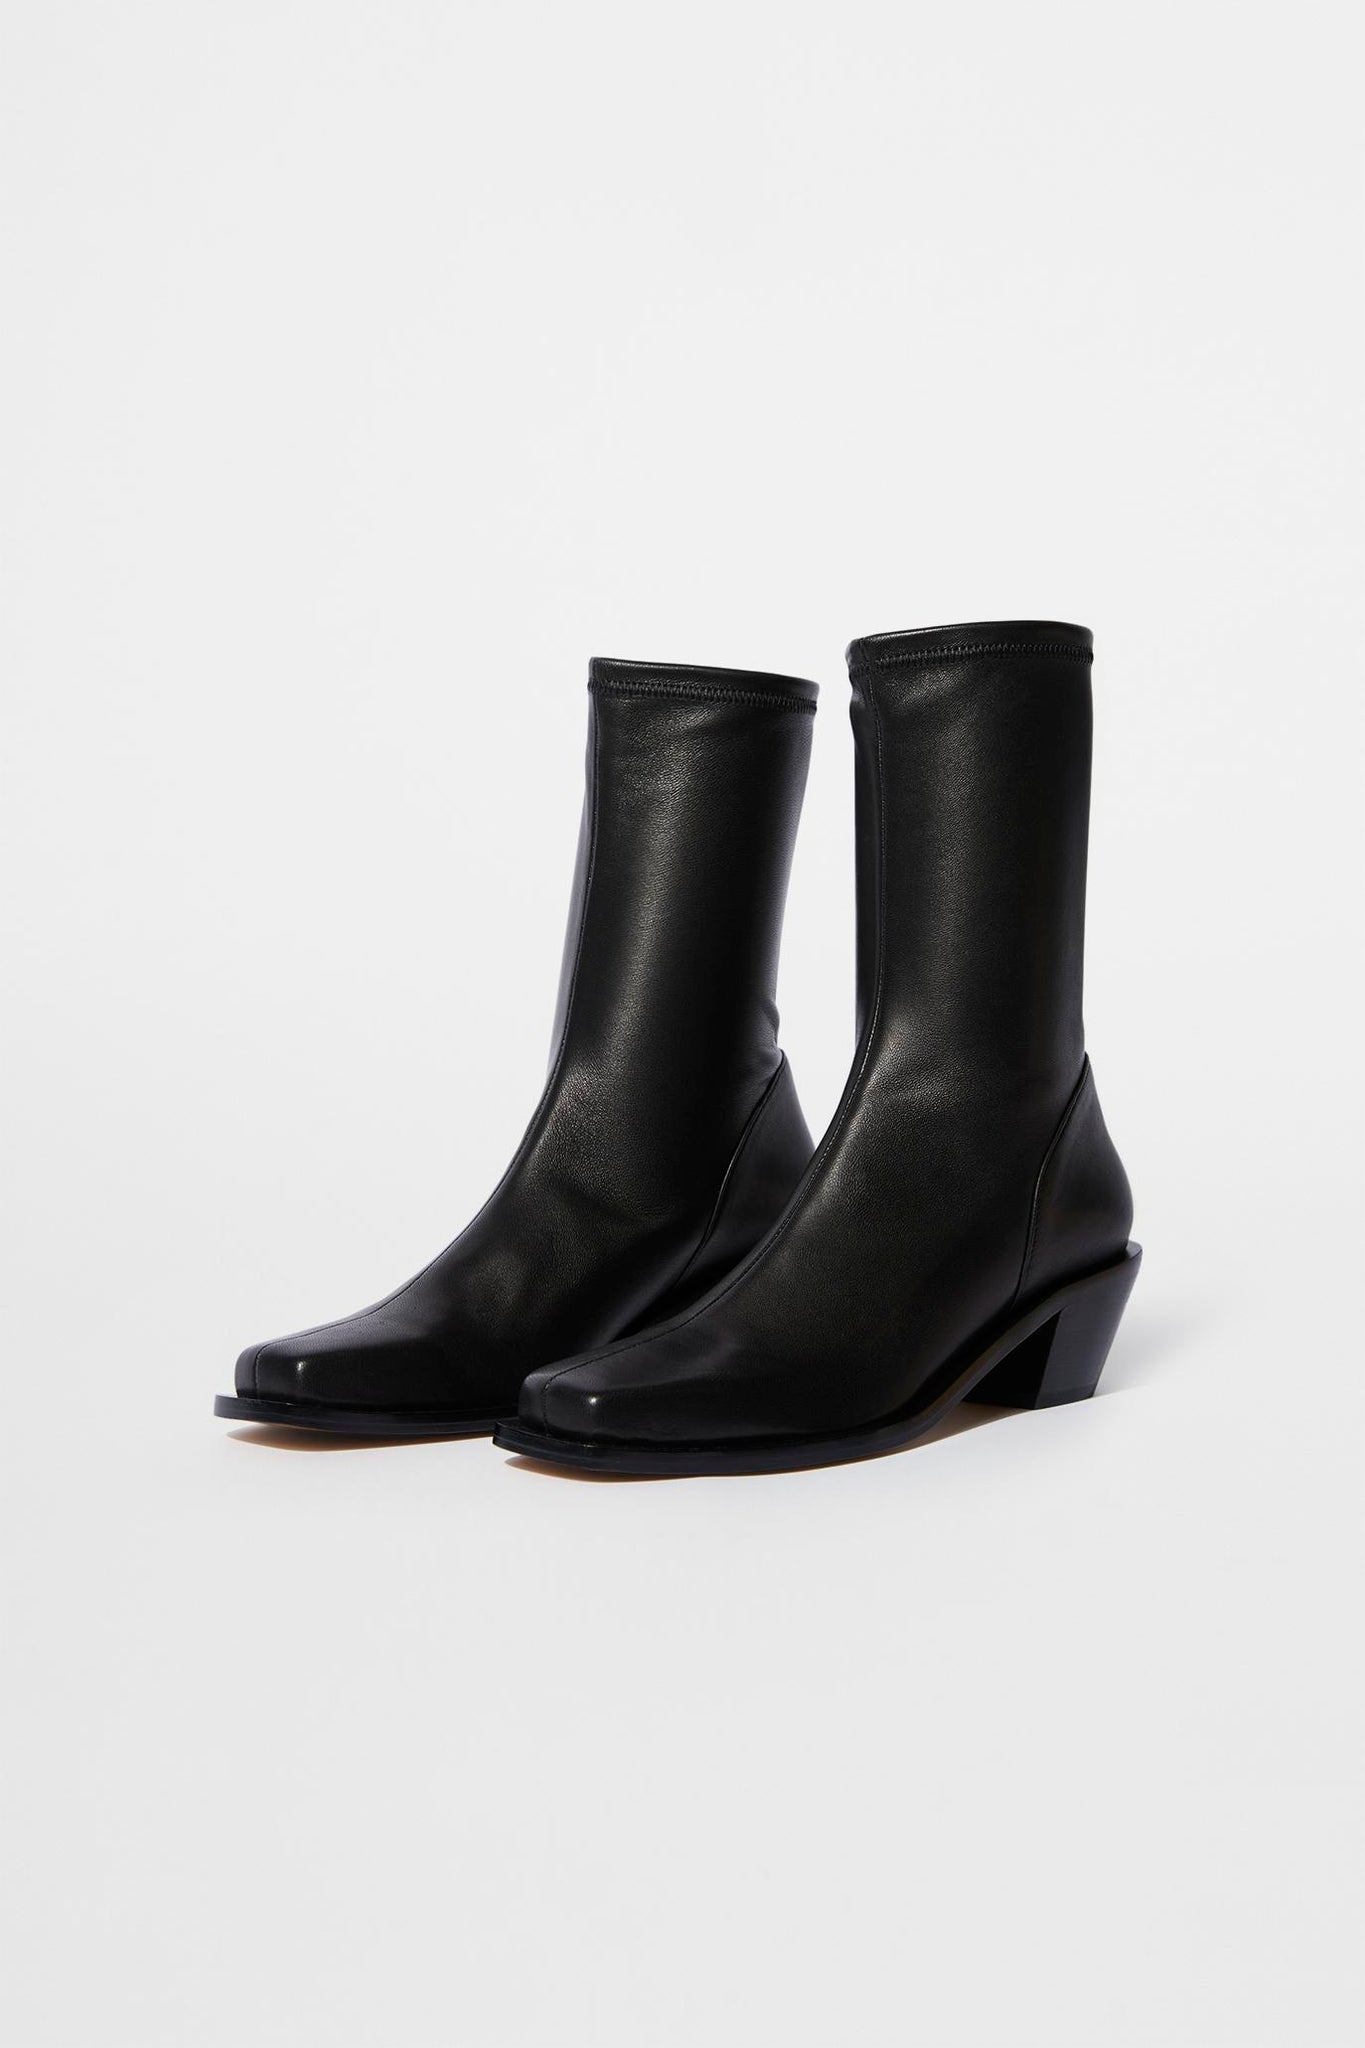 Livvy Vegan Leather Heeled Boots